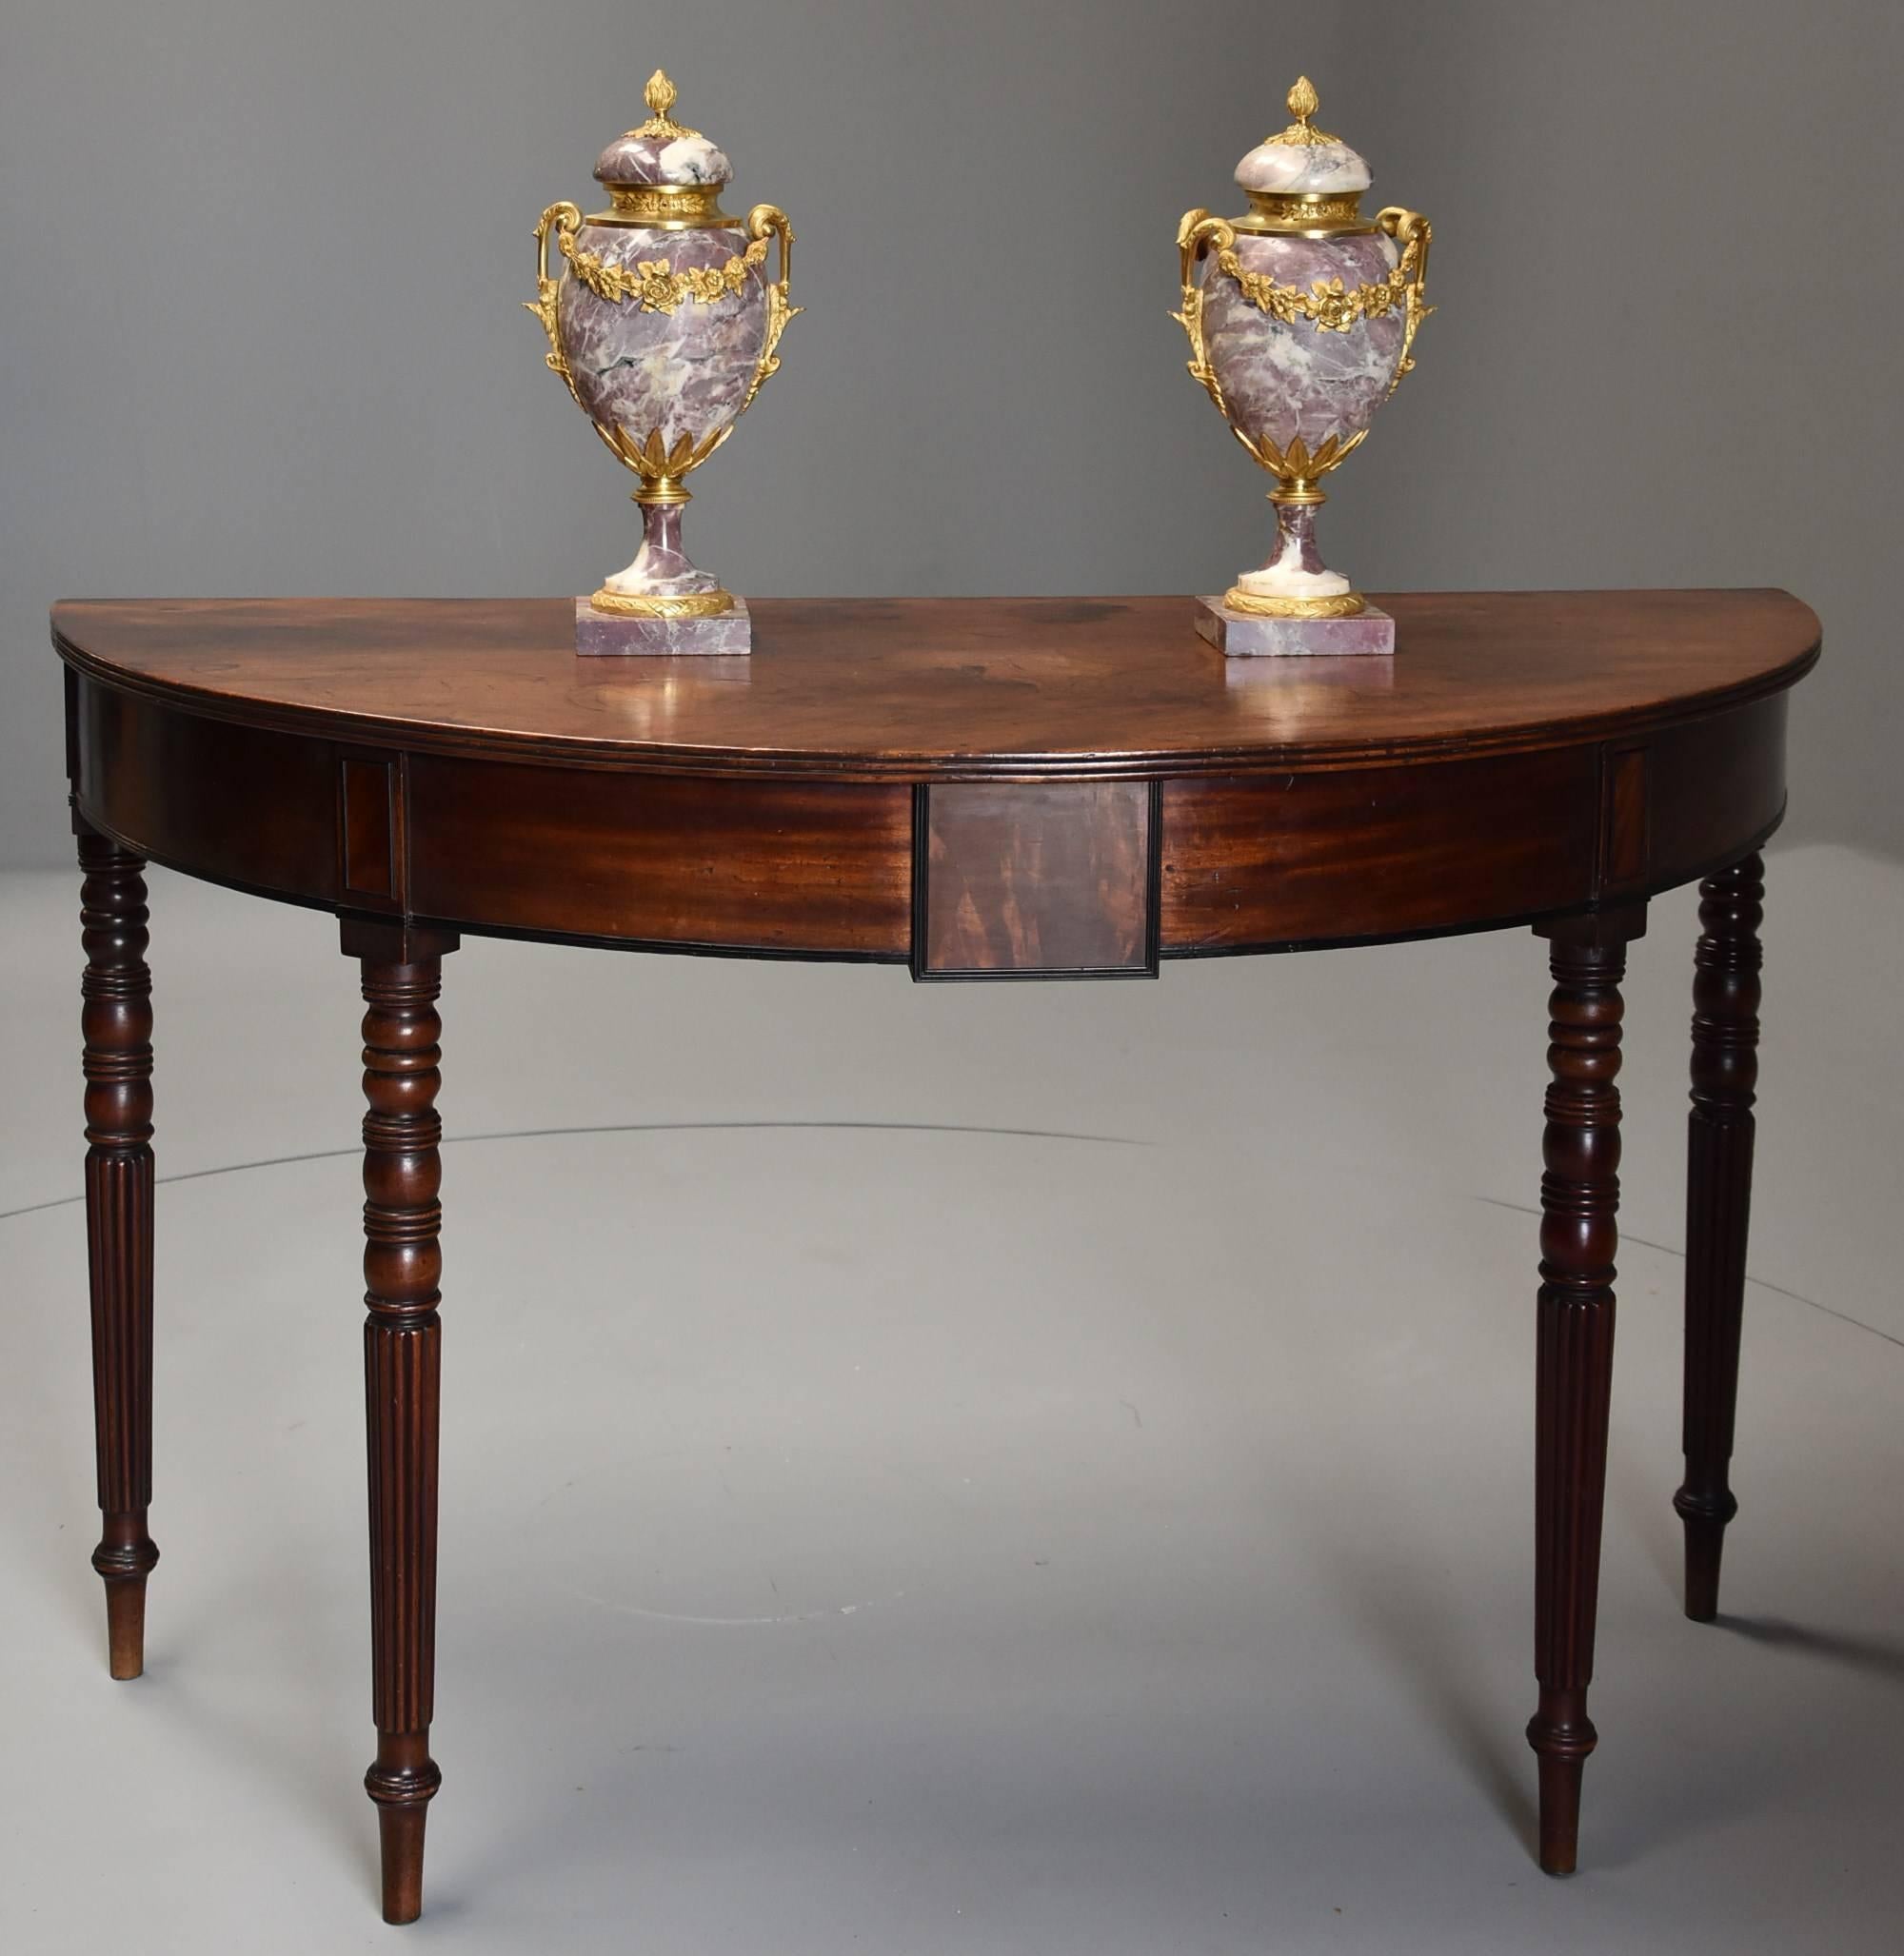 English Pair of Good Quality Early 19th Century Mahogany Demilune Console Tables